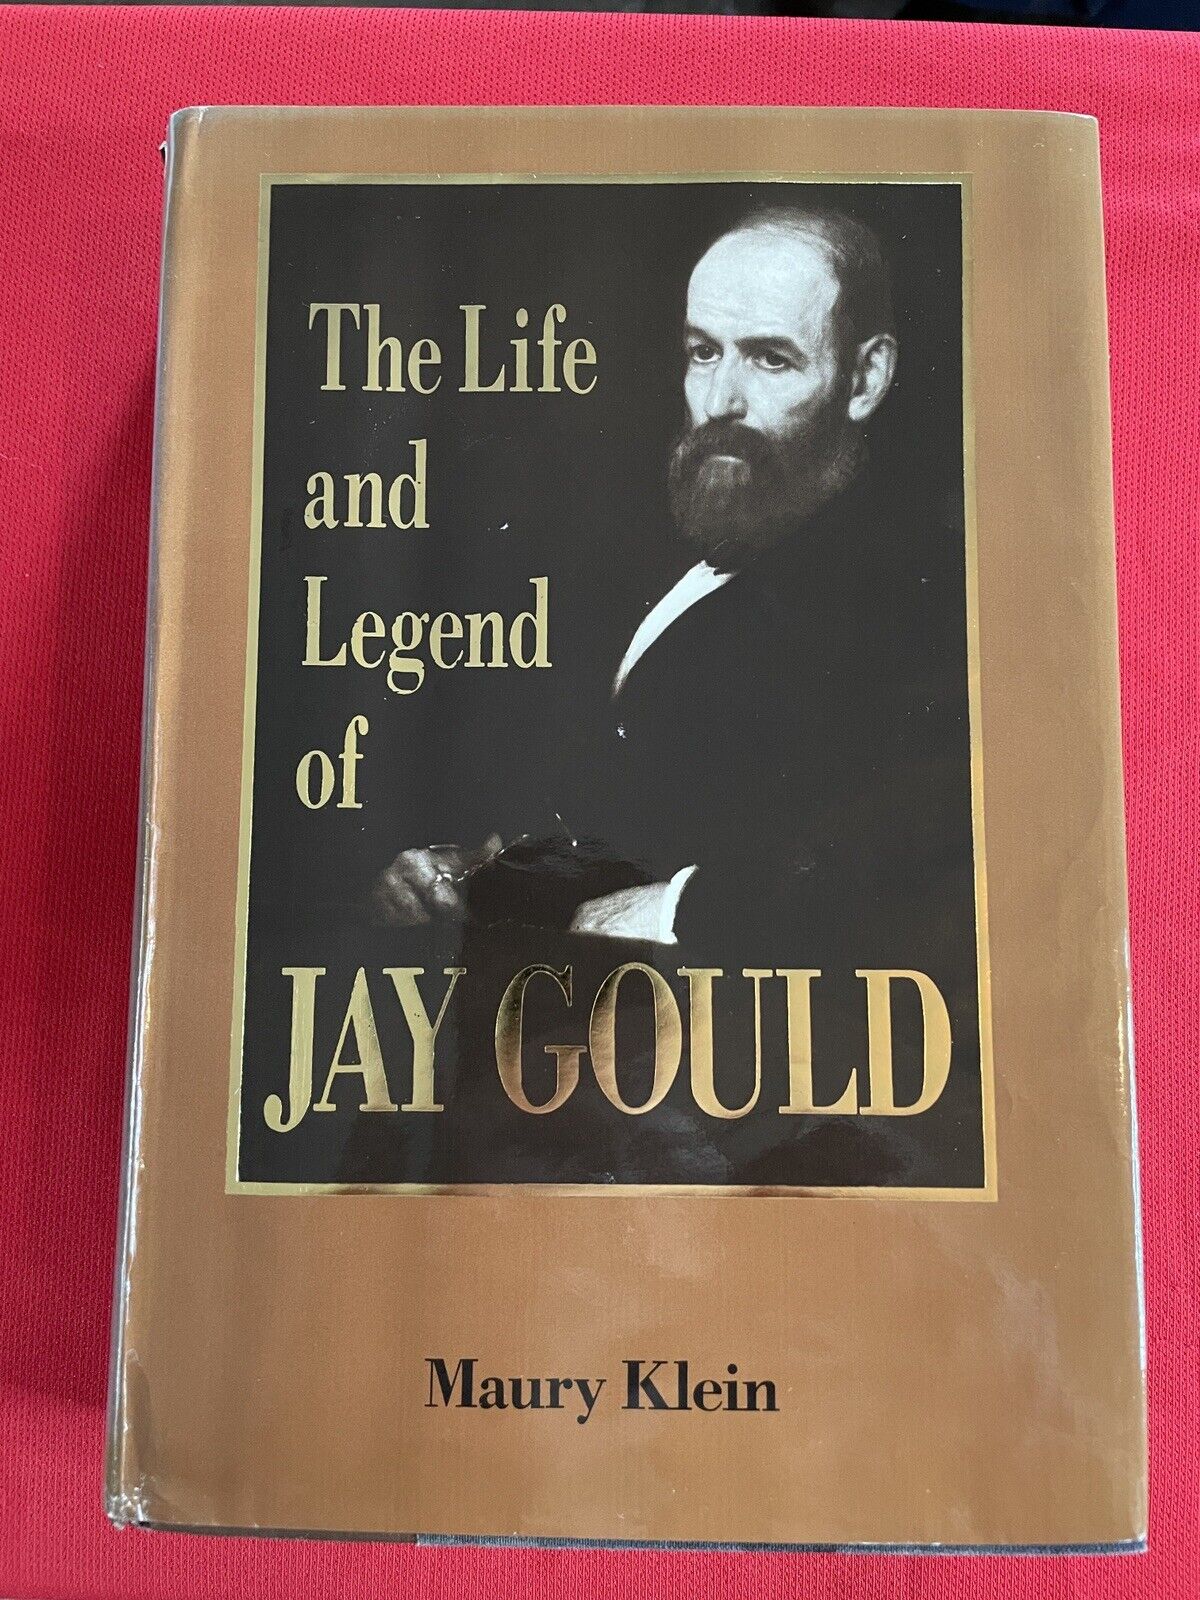 The Life and Legend of Jay Gould by Maury Klein - Hardcover - 1986, SKU 7175